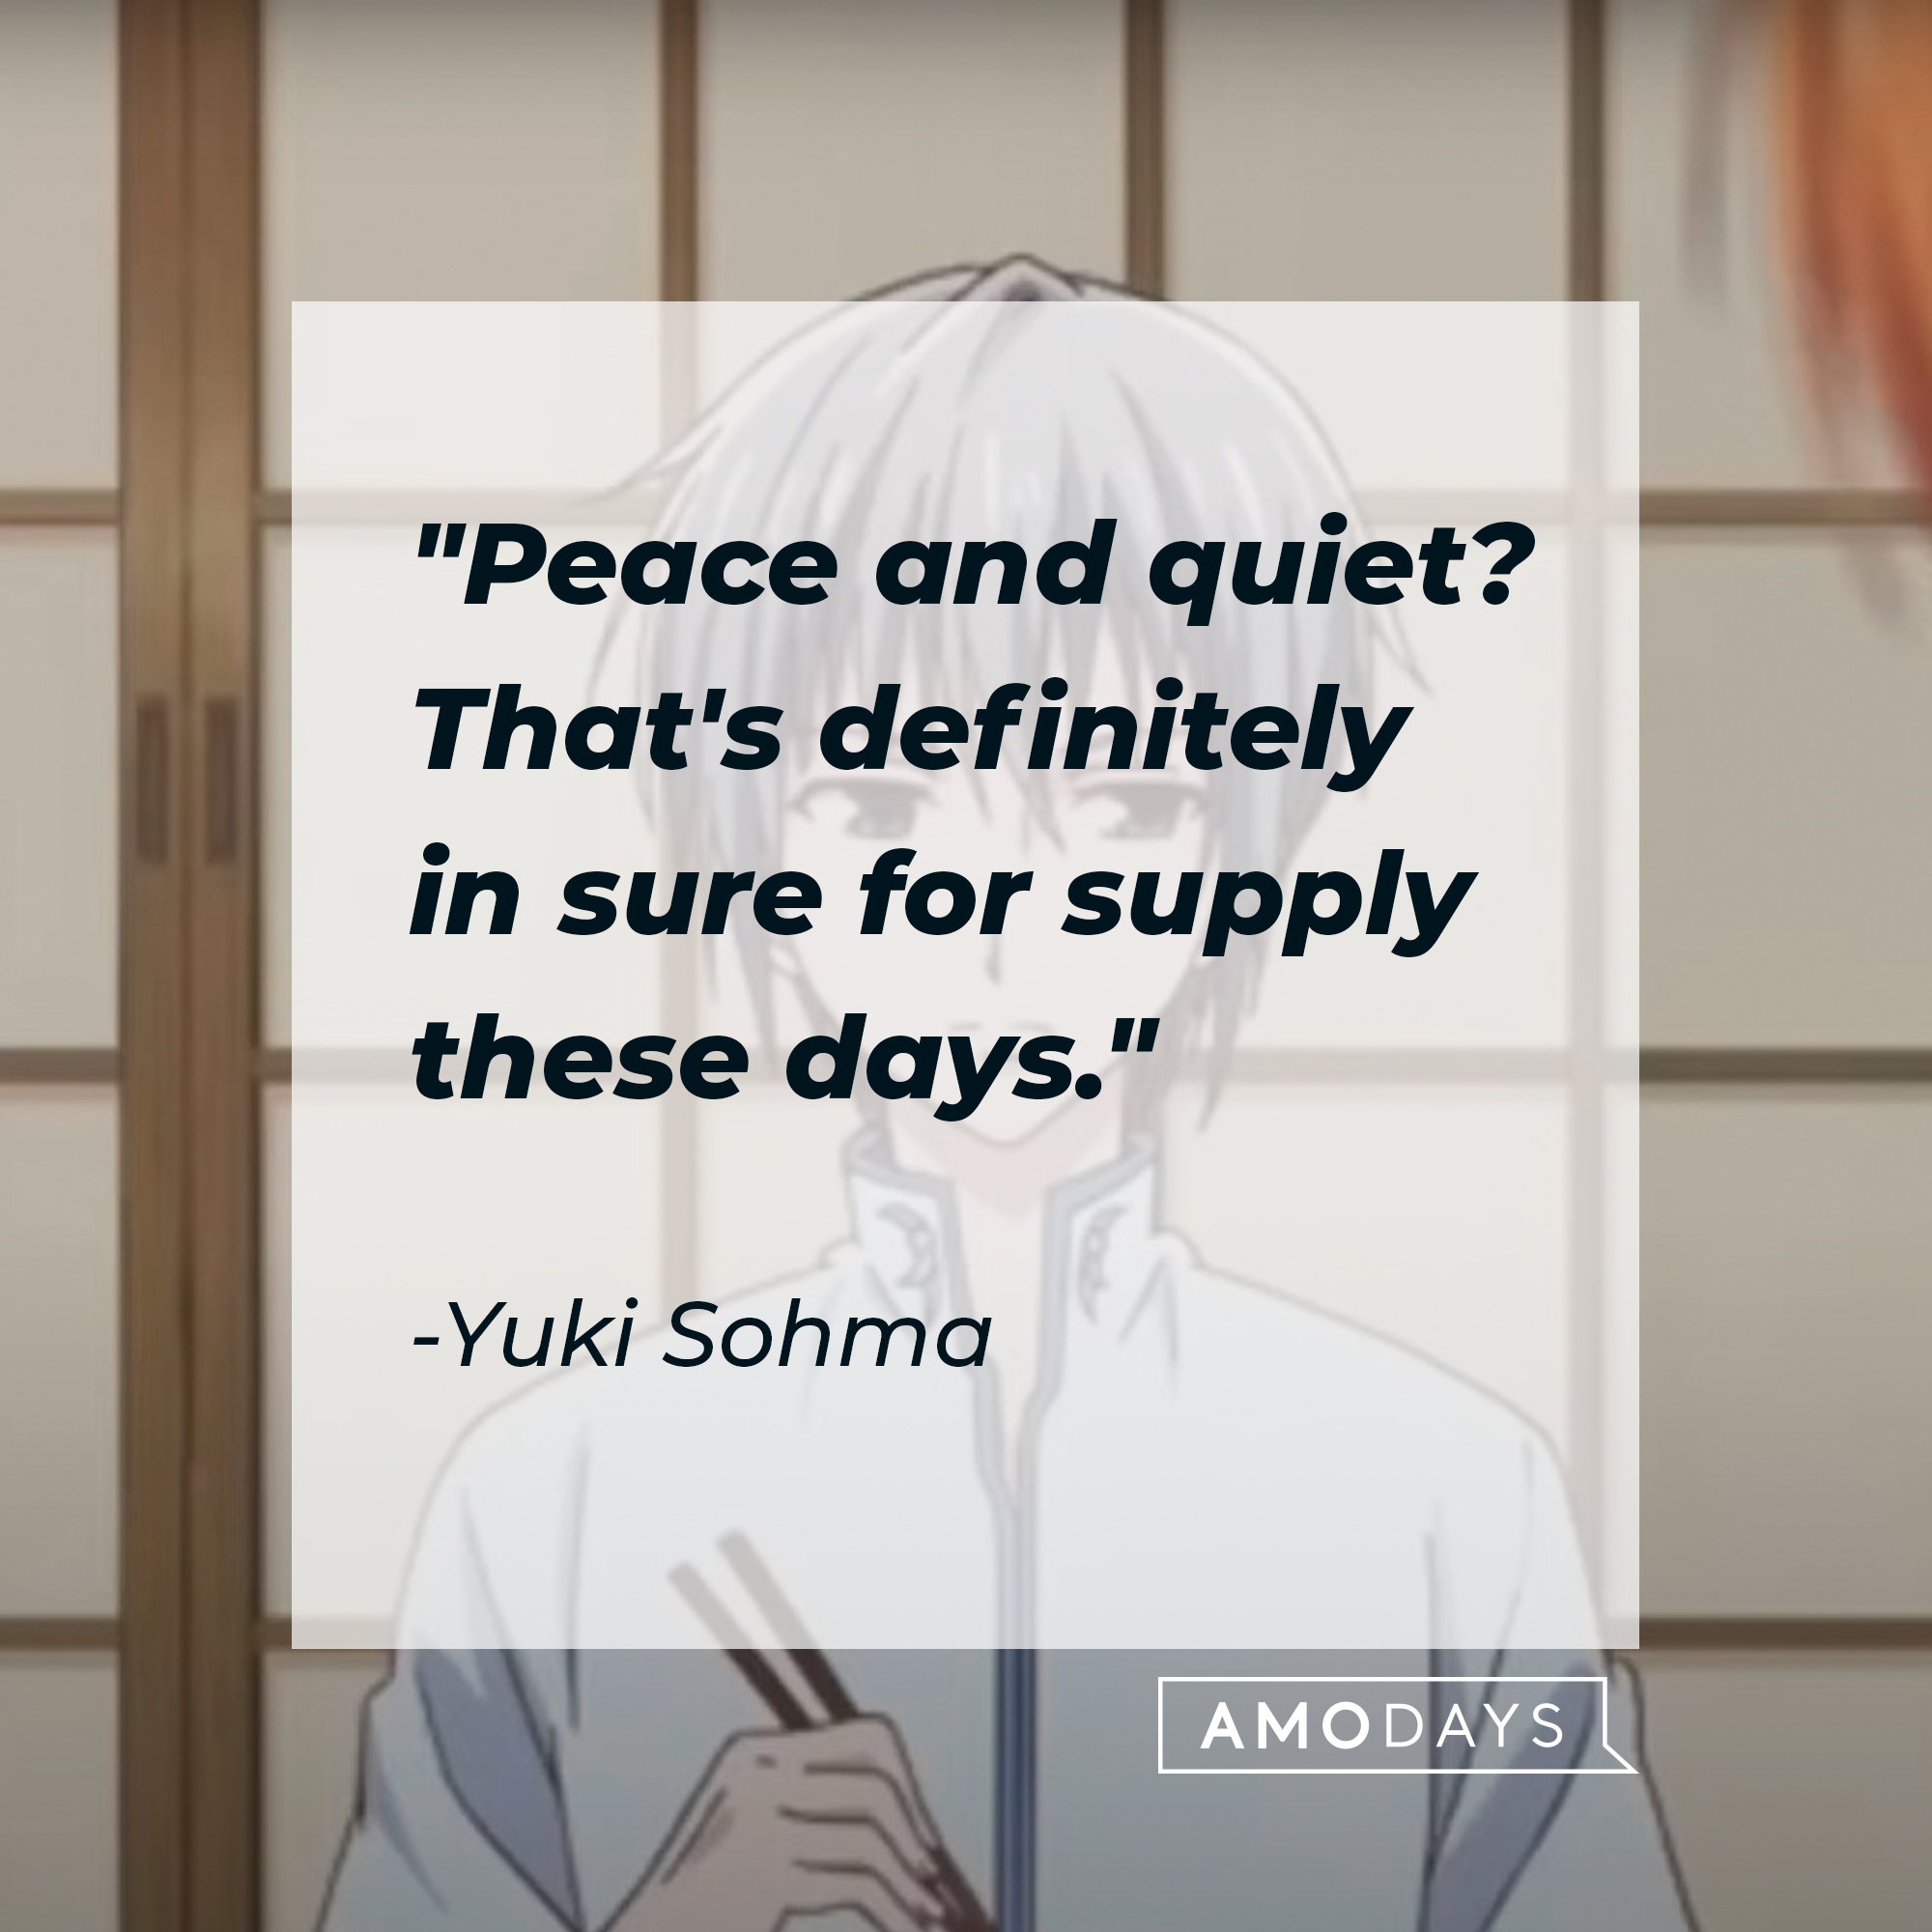 Yuki Sohma's quote: "Peace and quiet? That's definitely in sure for supply these days." | Source: Facebook.com/FruitsBasketOfficial